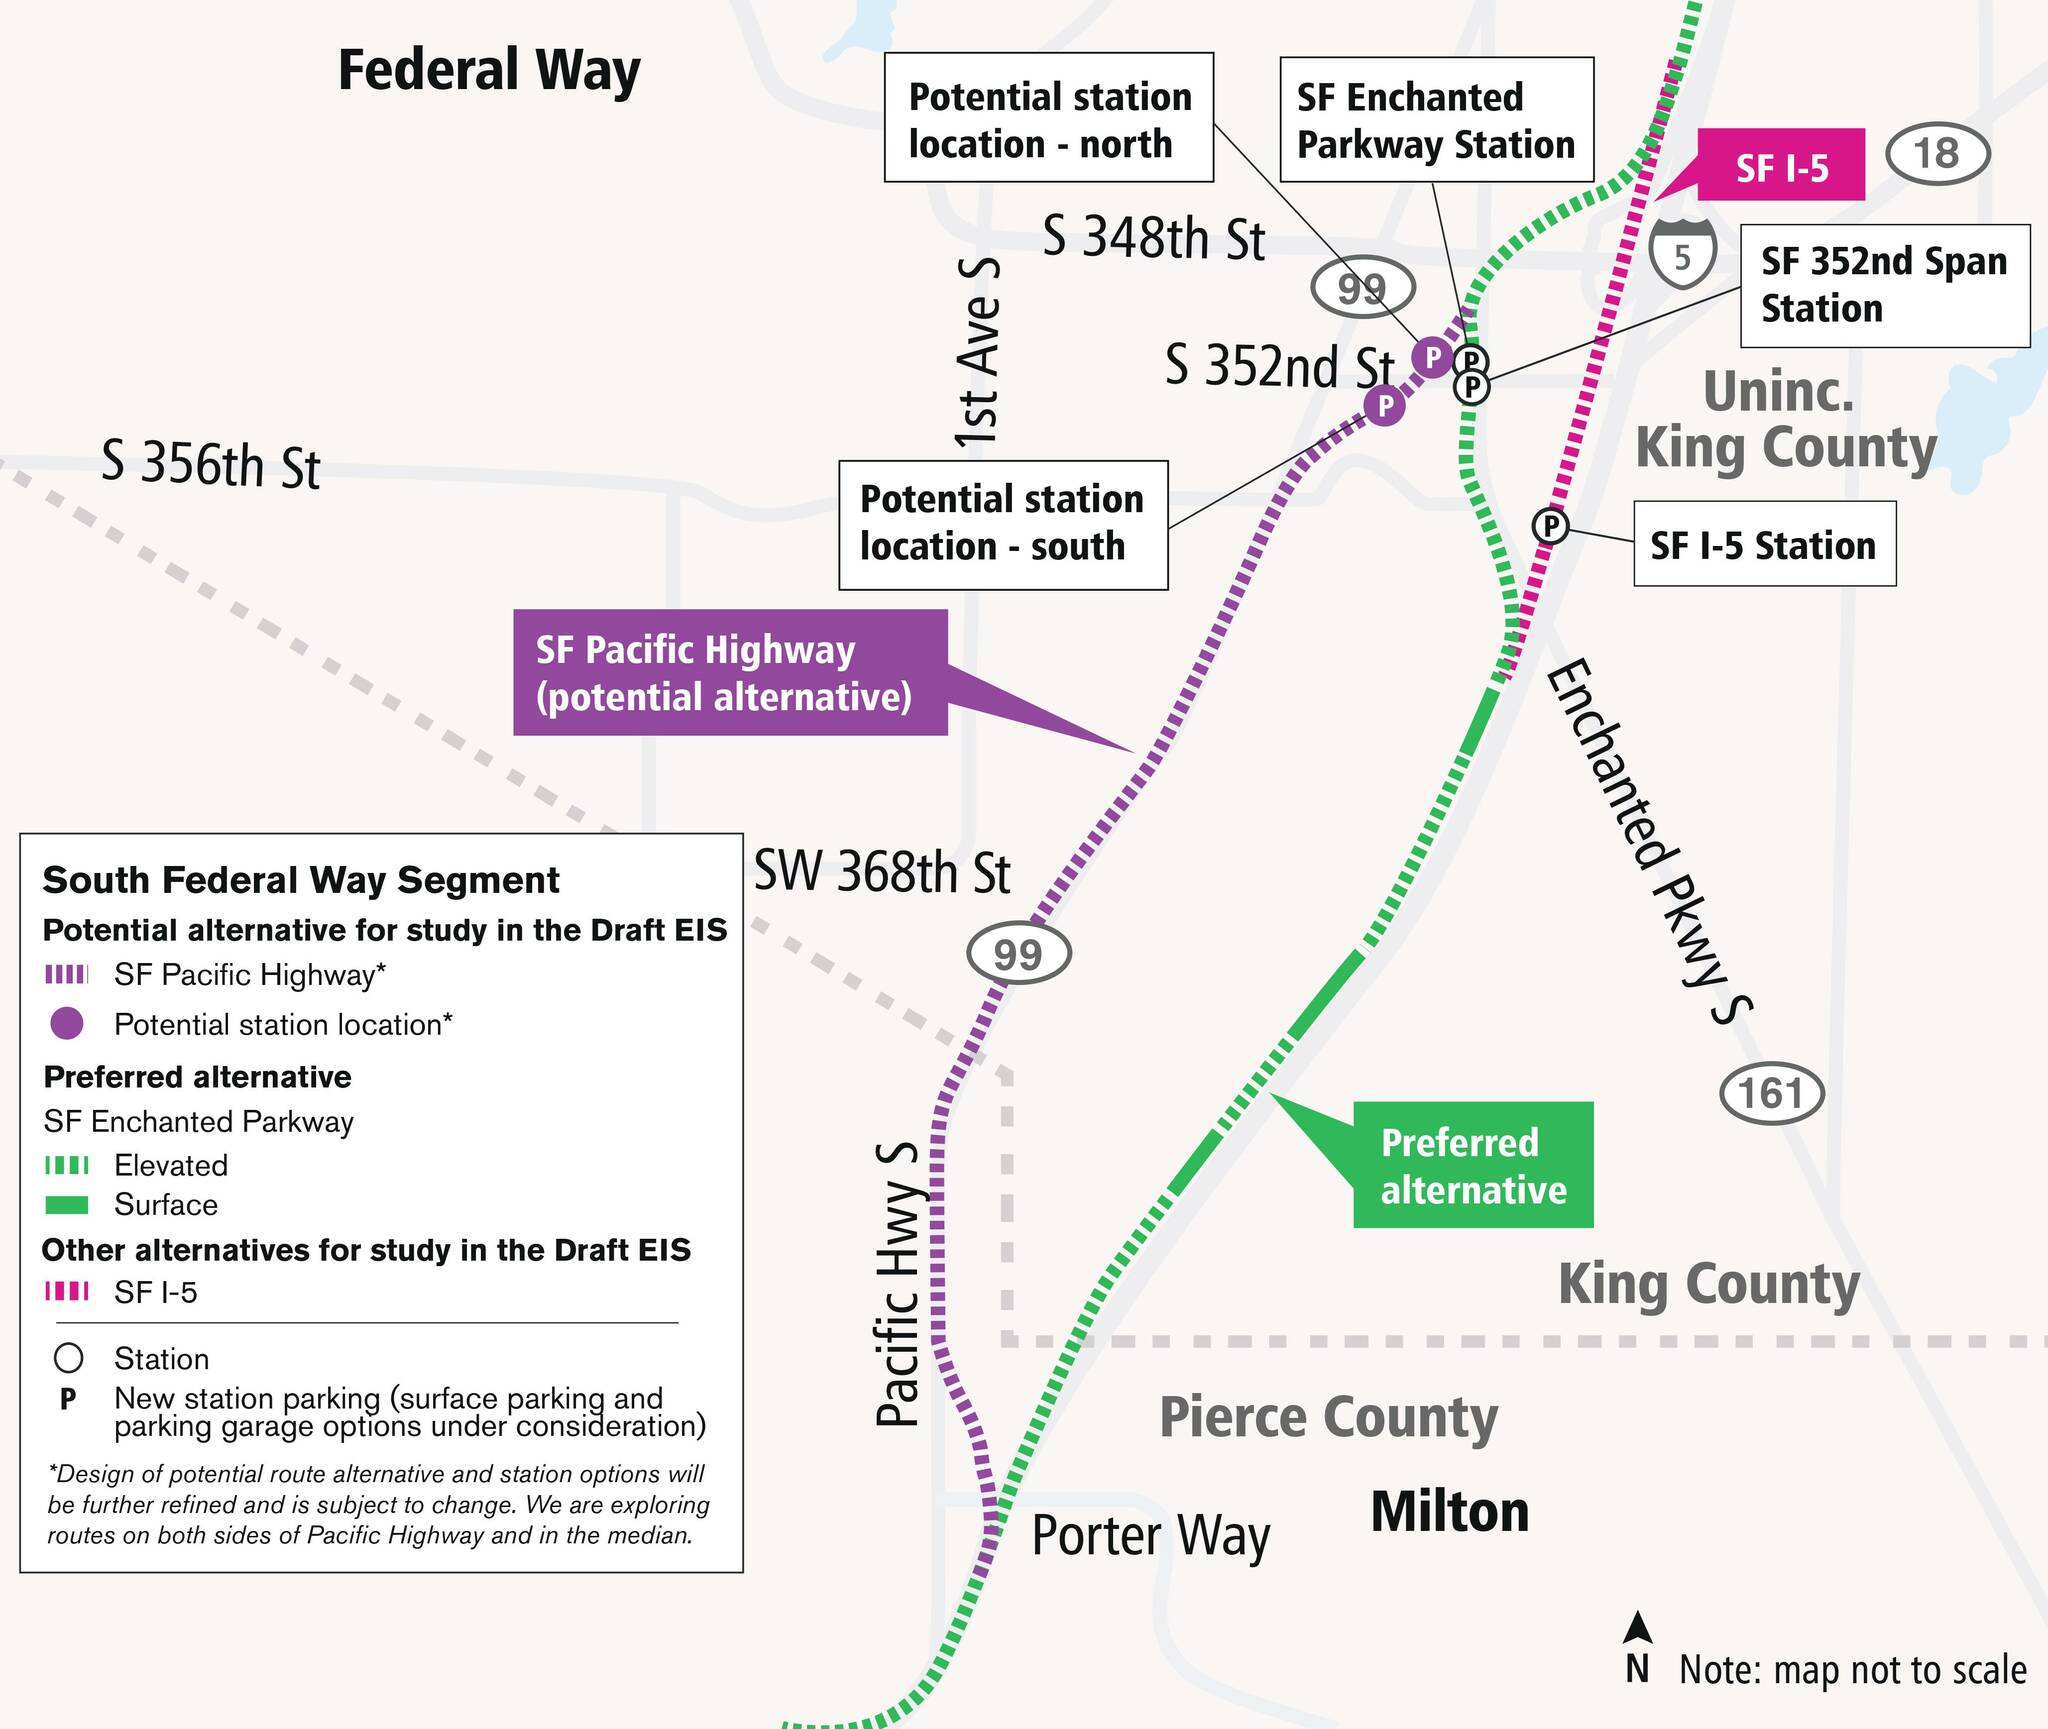 This map from Sound Transit shows several options under consideration for how the Link light rail line will proceed through the Federal Way area. The recent action by the organization’s board maintains the northern section of the line in green as the “preferred alternative,” or the route ST believes is the best option. But the area south of the SF Enchanted Parkway Station is no longer part of the preferred route, and in fact, there isn’t a preferred route past that point any longer. Sound Transit will continue studying its options.